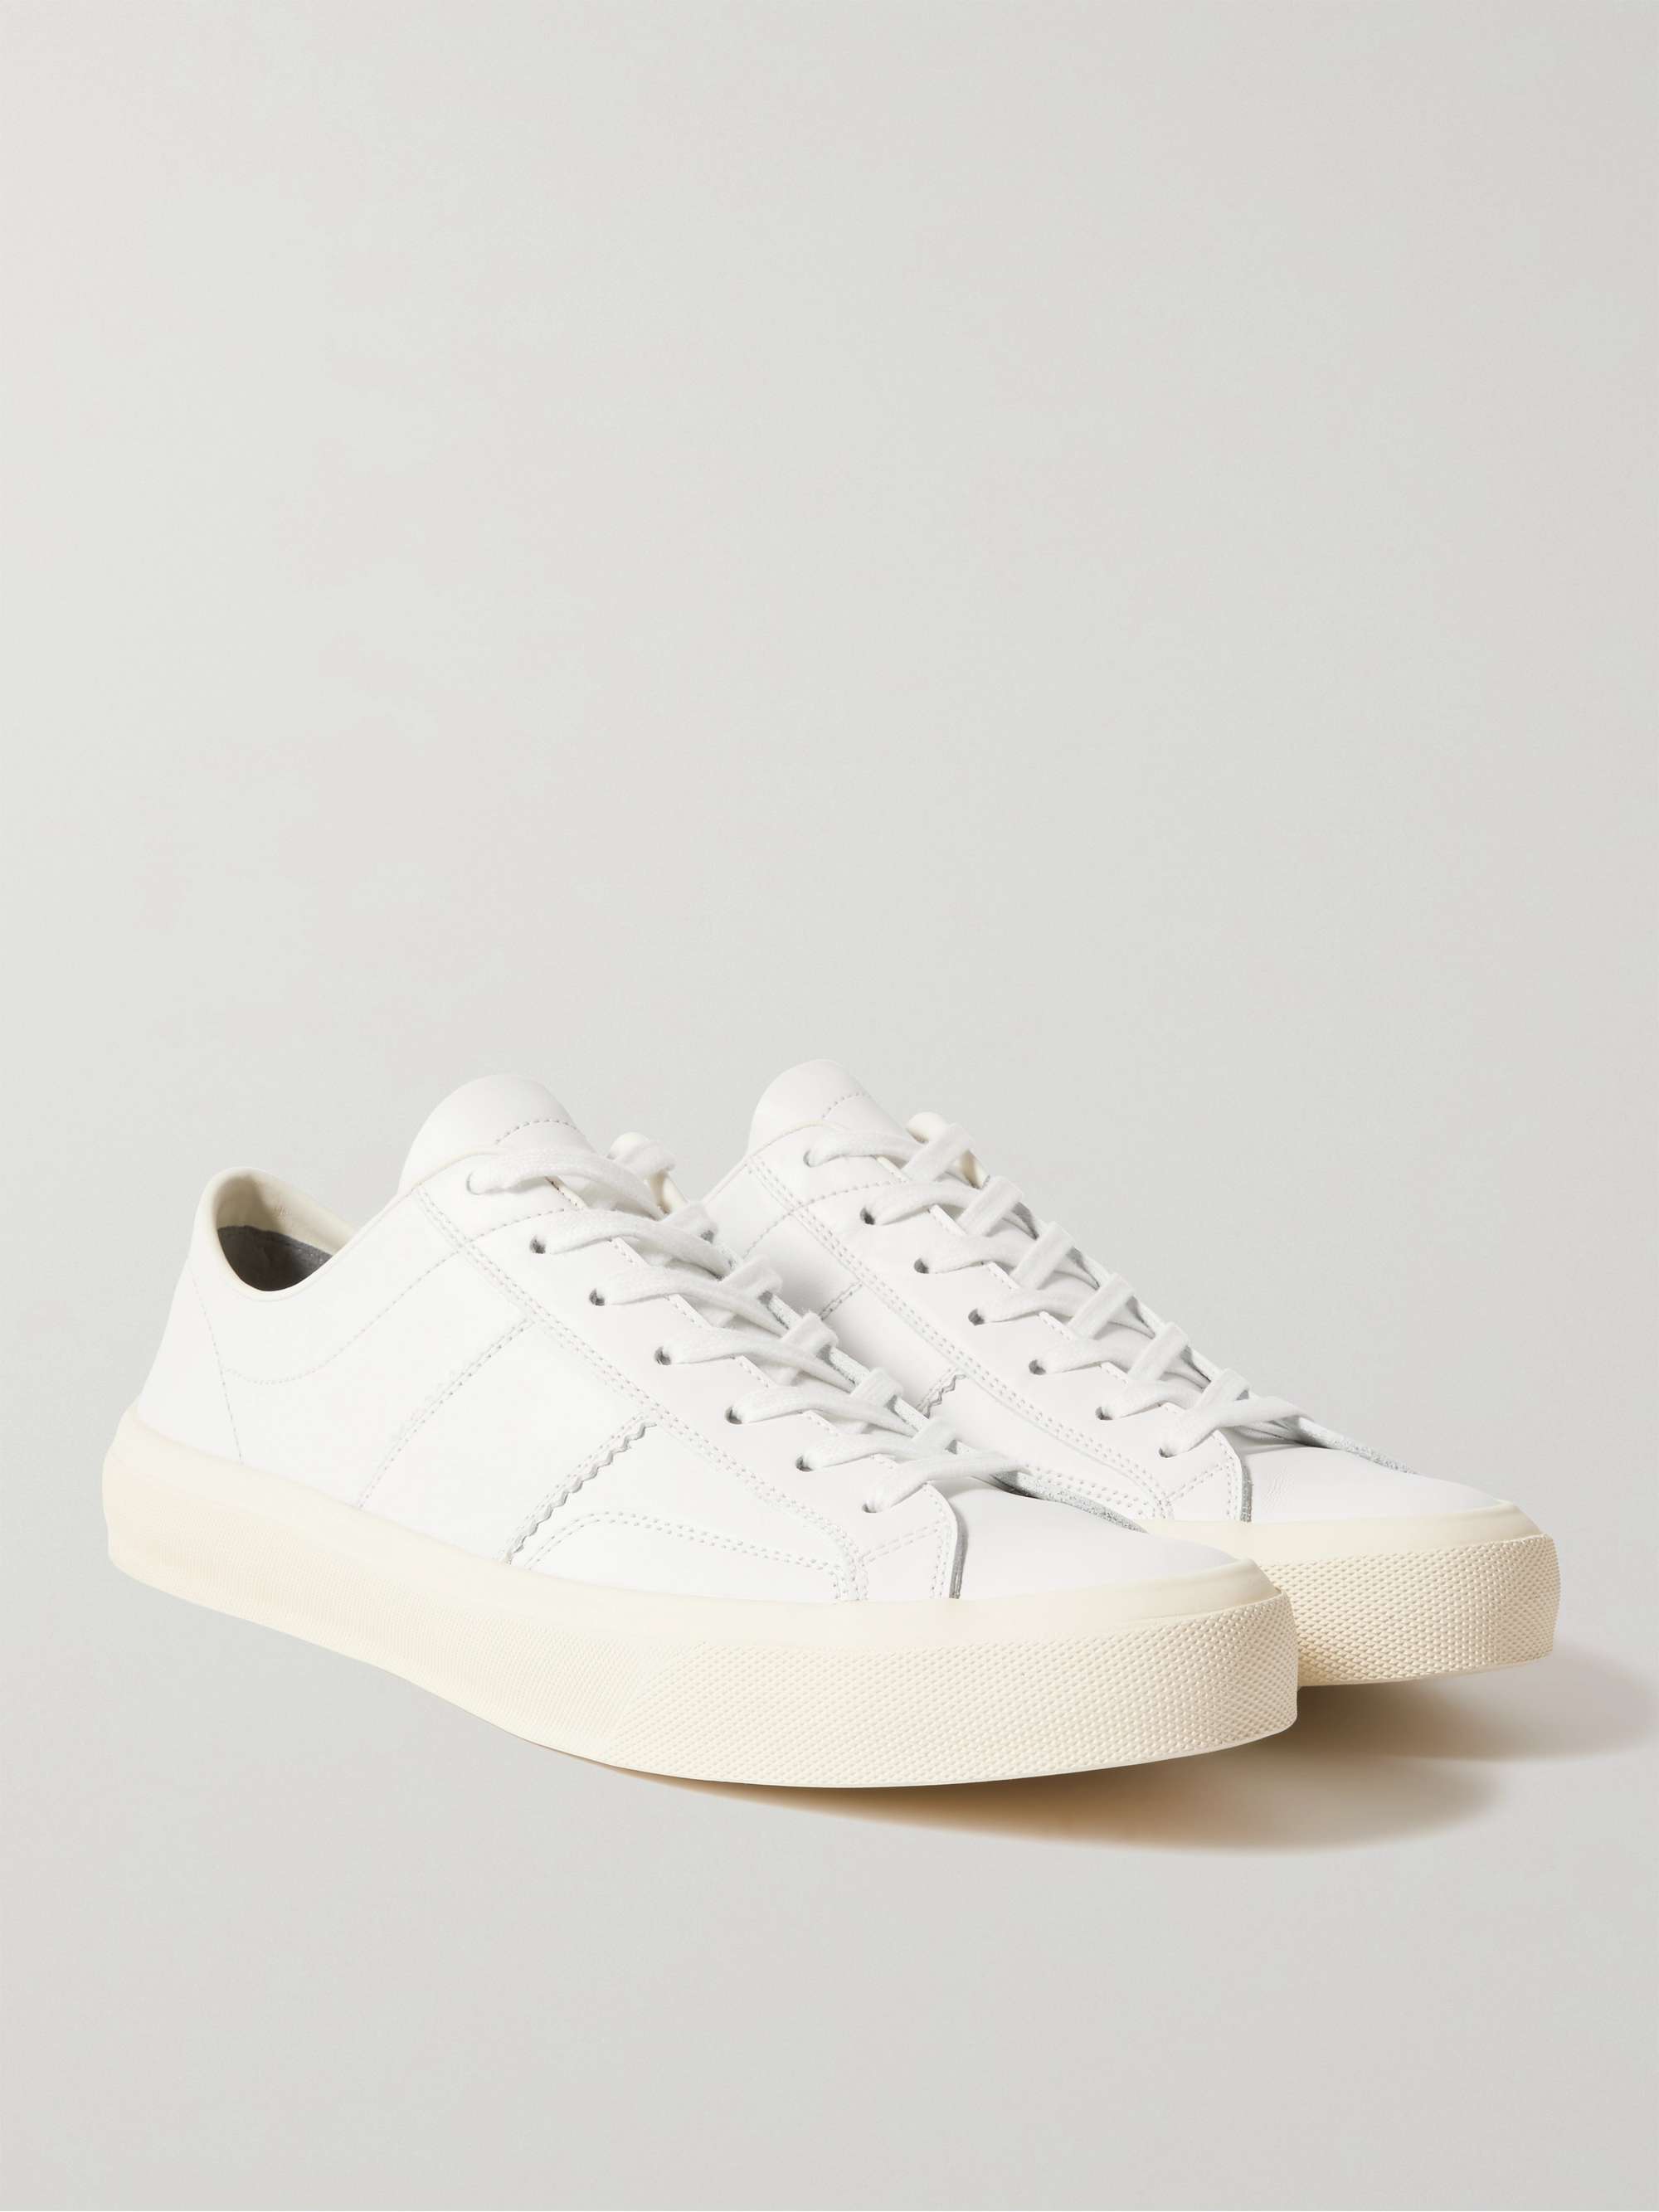 TOM FORD Cambridge Leather Sneakers